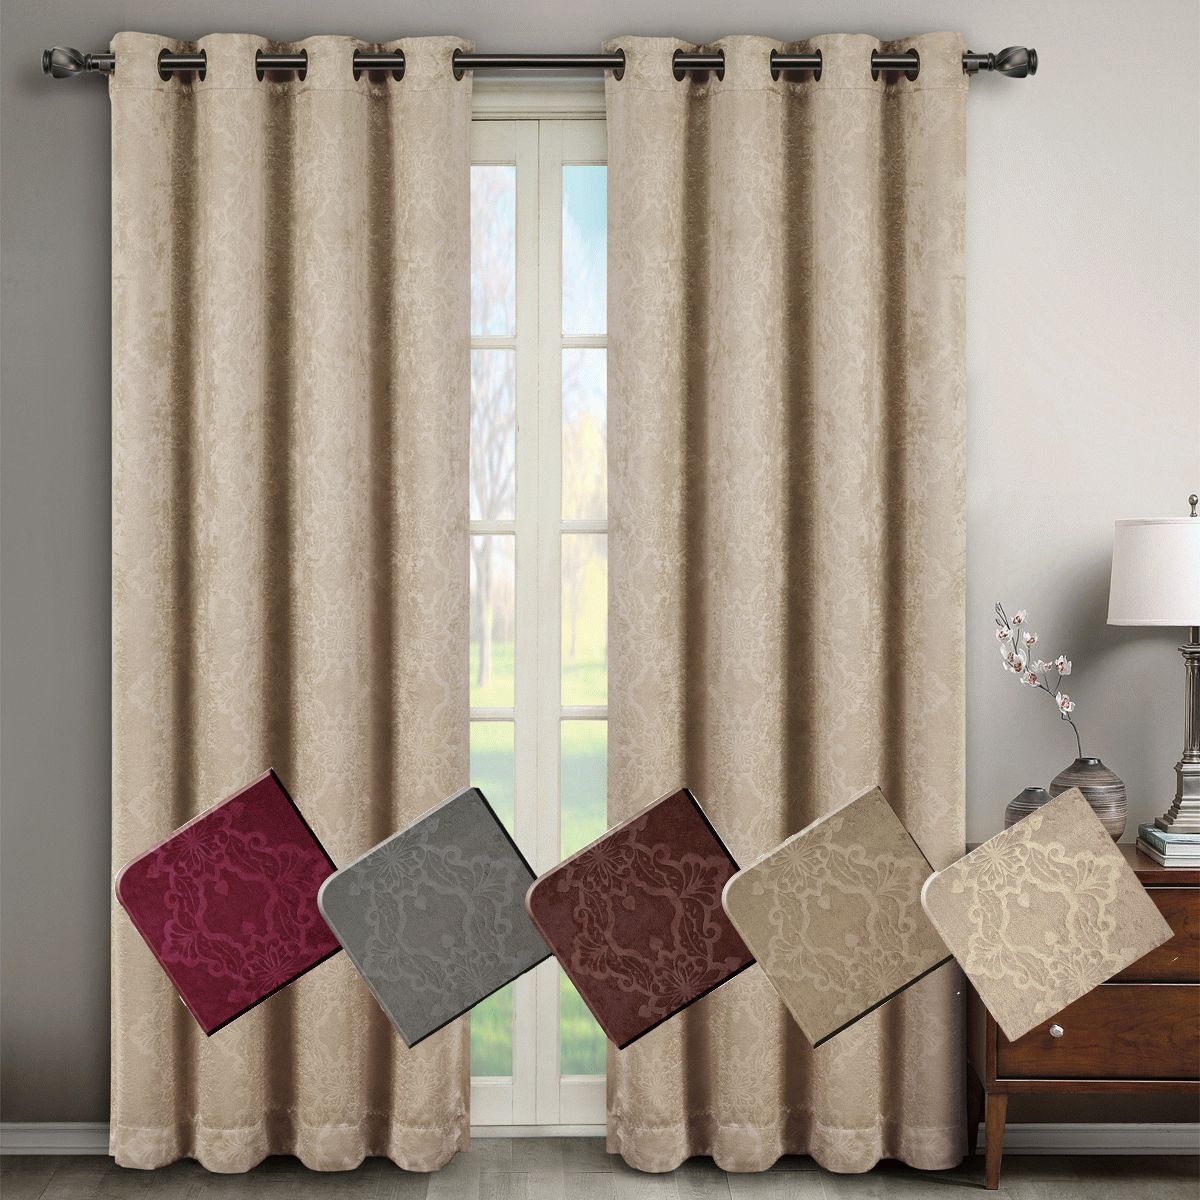 Bella Pair (set Of 2) Blackout Weave Embossed Grommet Window With Woven Blackout Curtain Panel Pairs With Grommet Top (View 14 of 30)